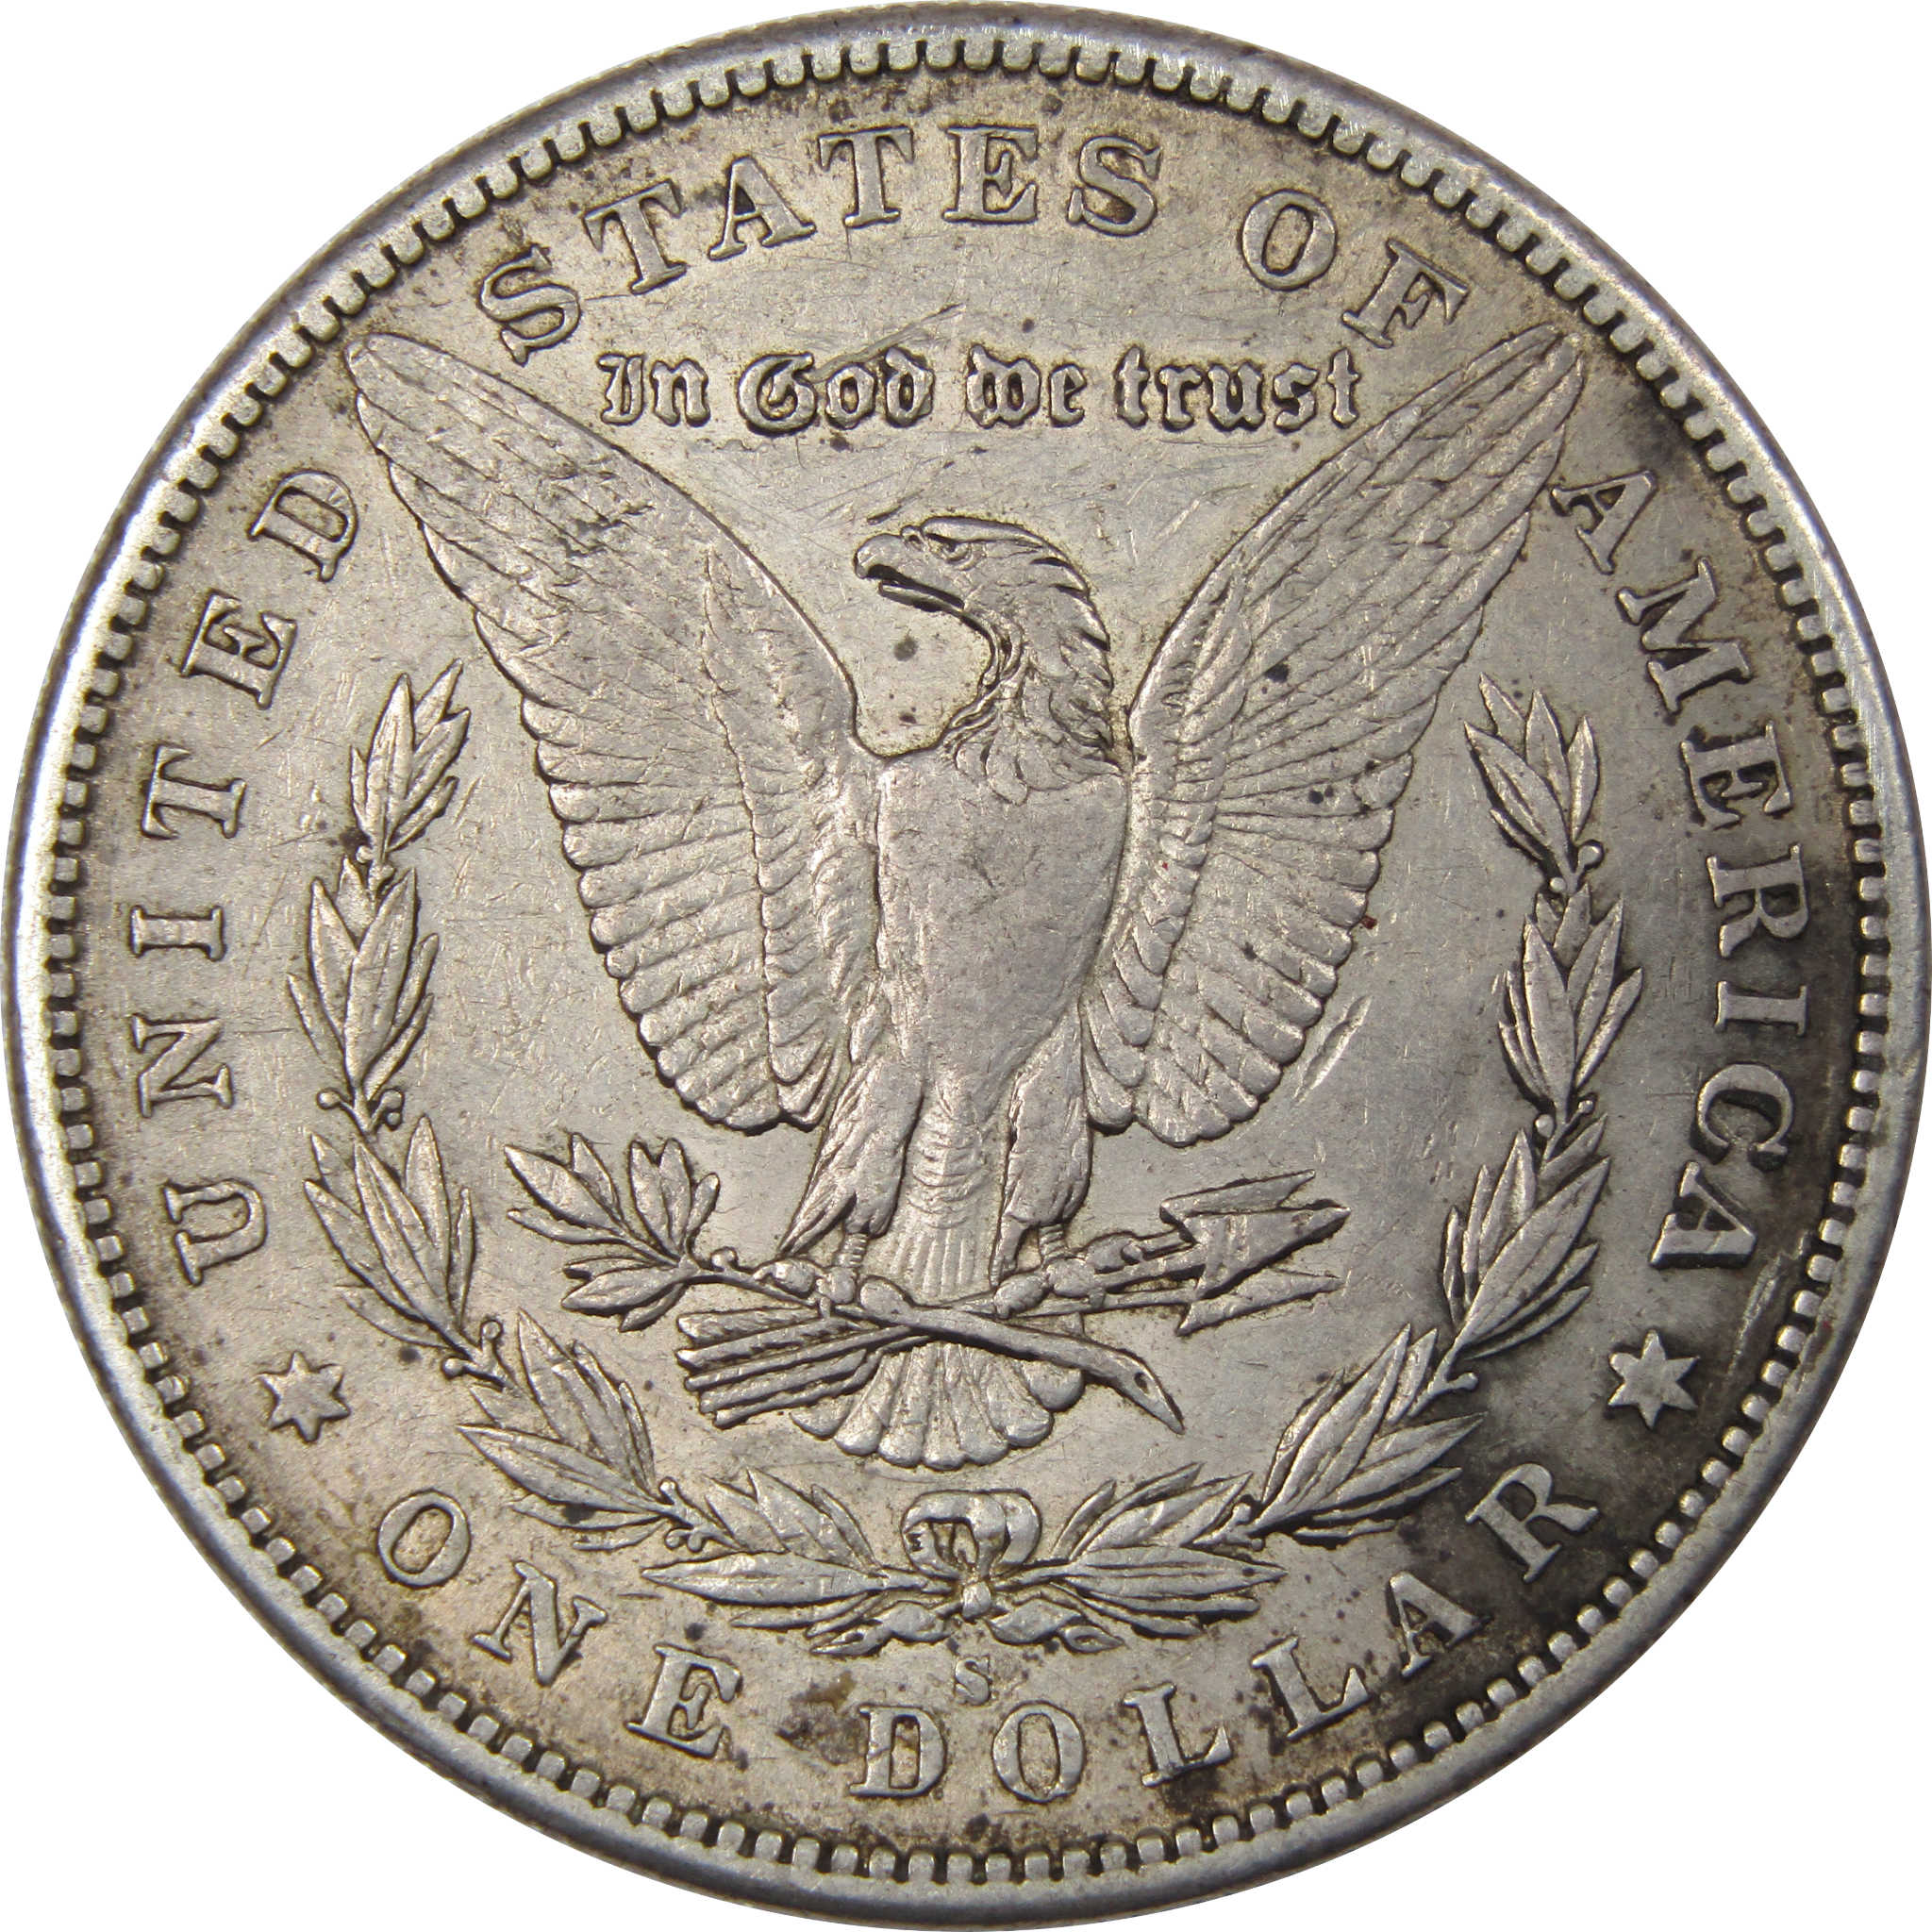 1883 S Morgan Dollar XF EF Extremely Fine 90% Silver Coin SKU:I1112 - Morgan coin - Morgan silver dollar - Morgan silver dollar for sale - Profile Coins &amp; Collectibles